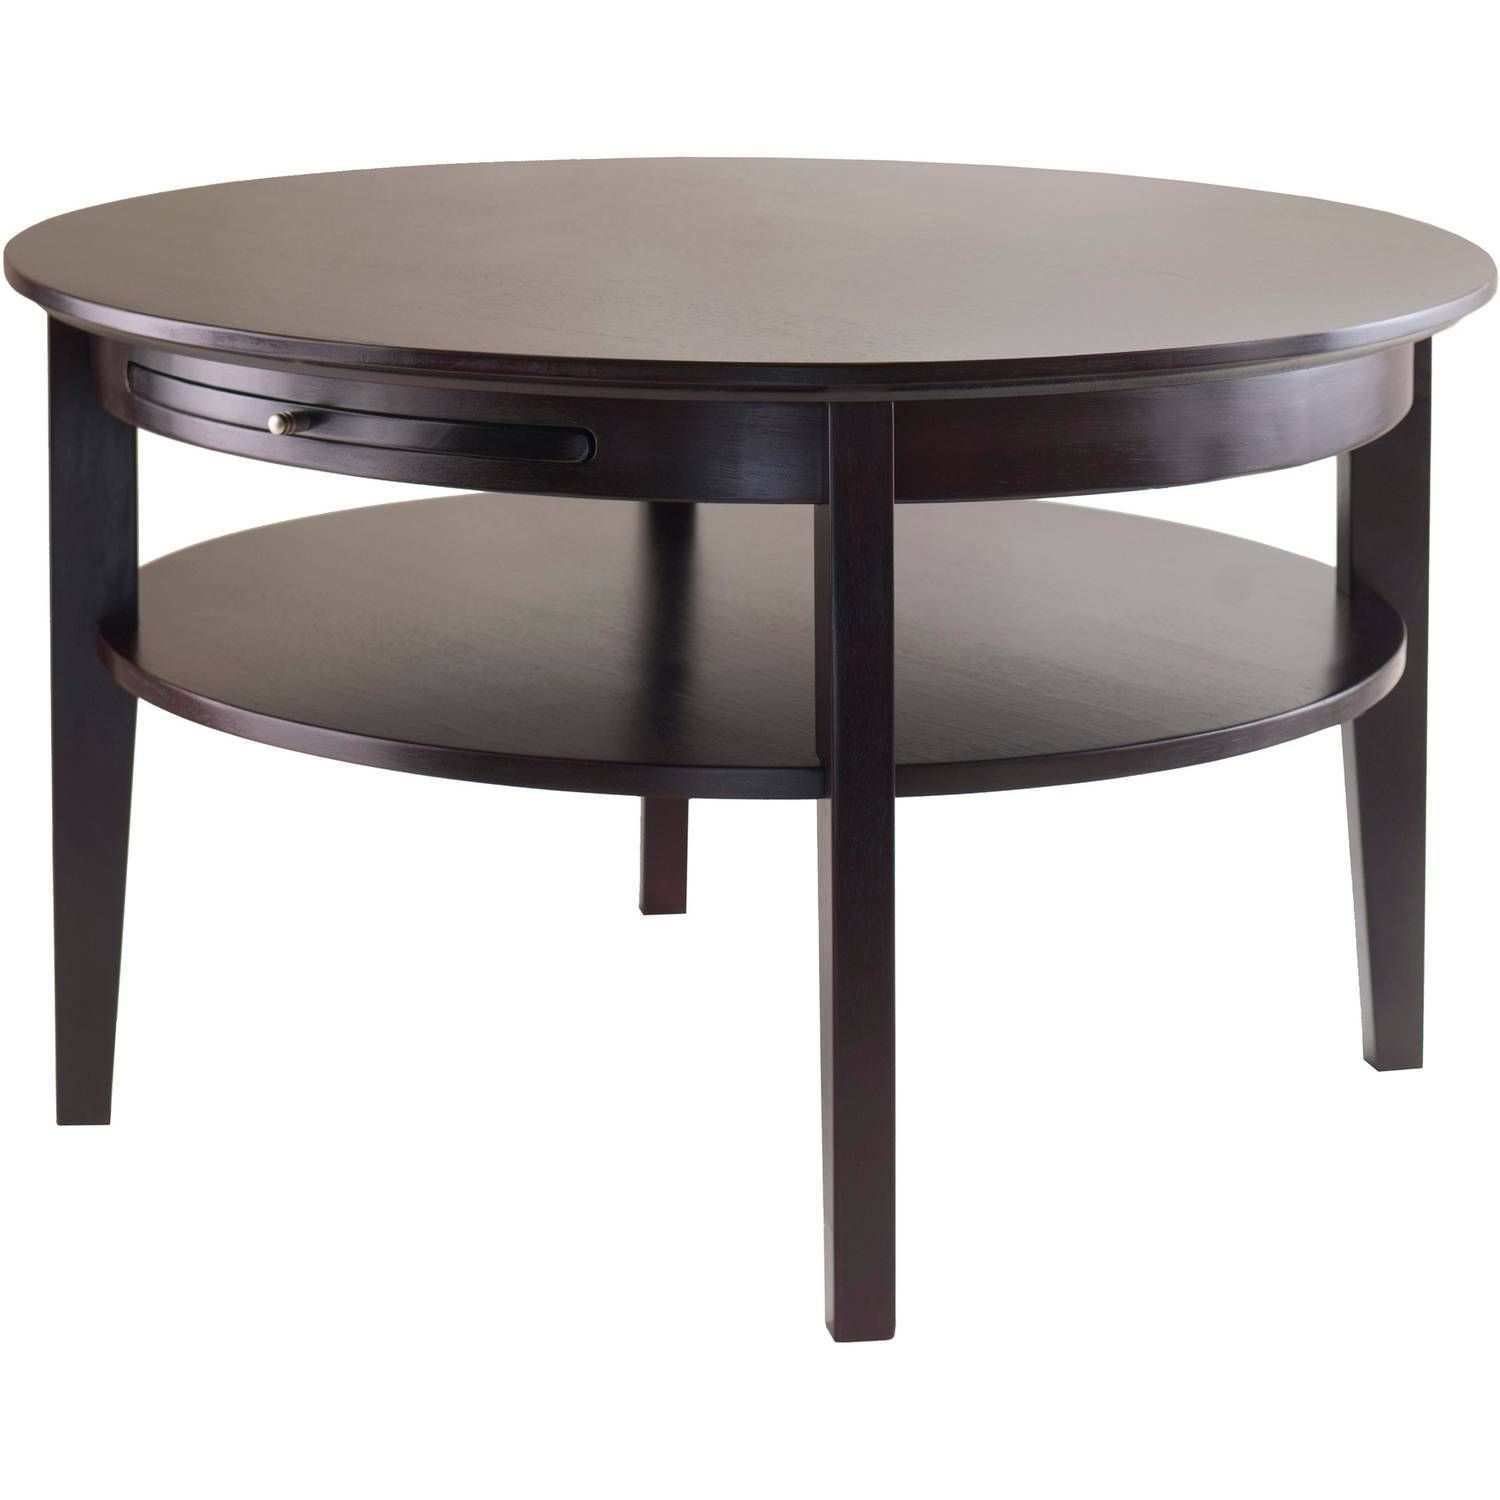 Decor: Stunning Oversized Coffee Table Style With Elegant Design Throughout Oversized Round Coffee Tables (View 18 of 30)